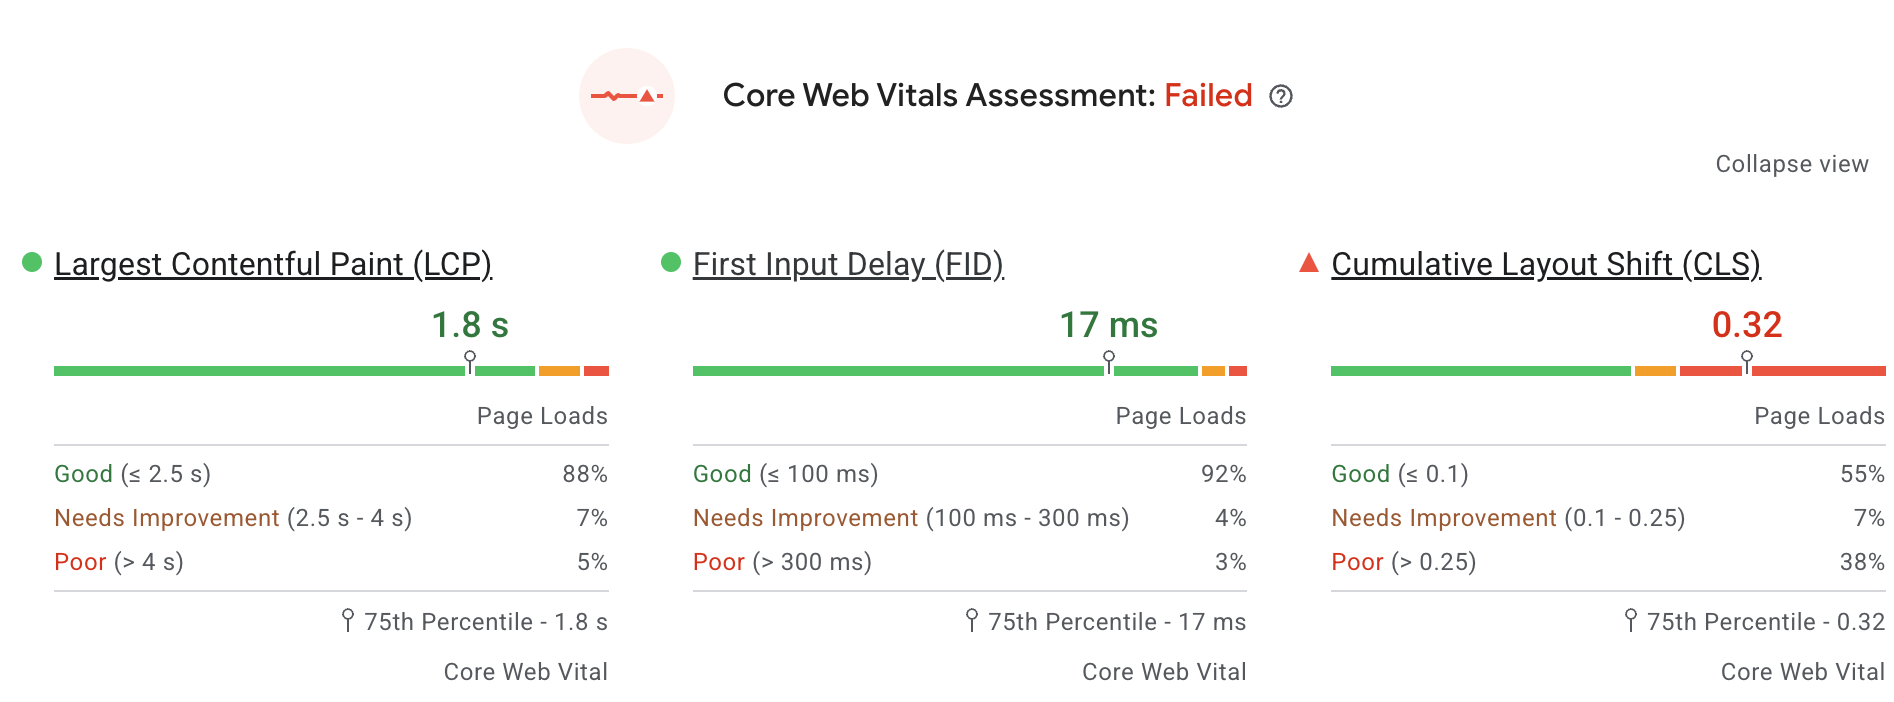 What is Core Web Vitals Assessment Failed on Pagespeed